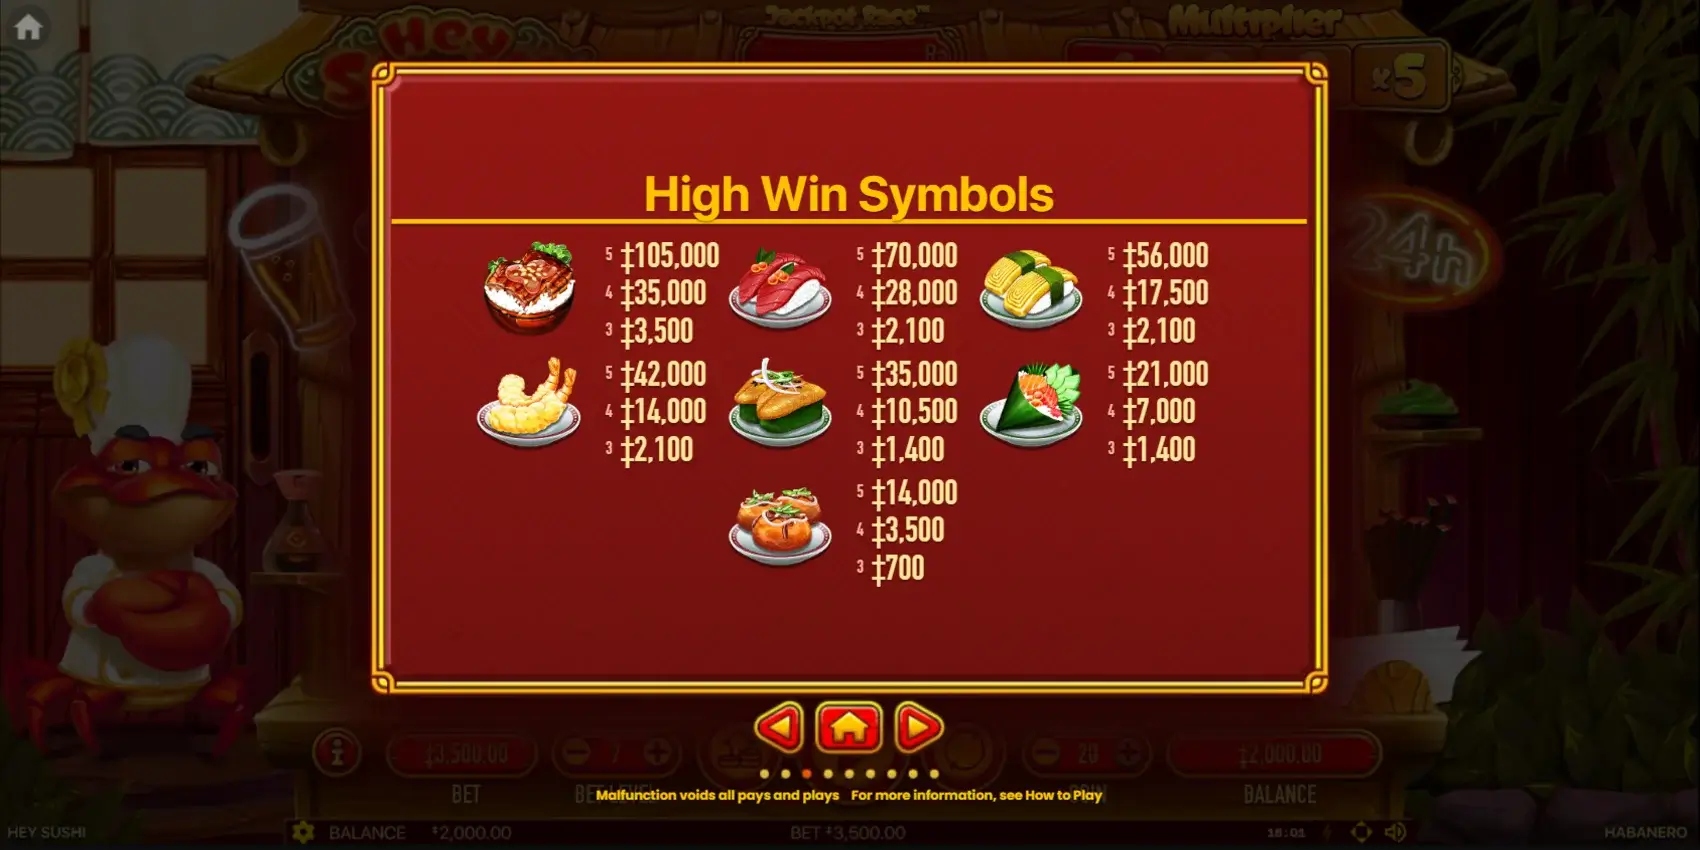 Hey Sushi slot game features